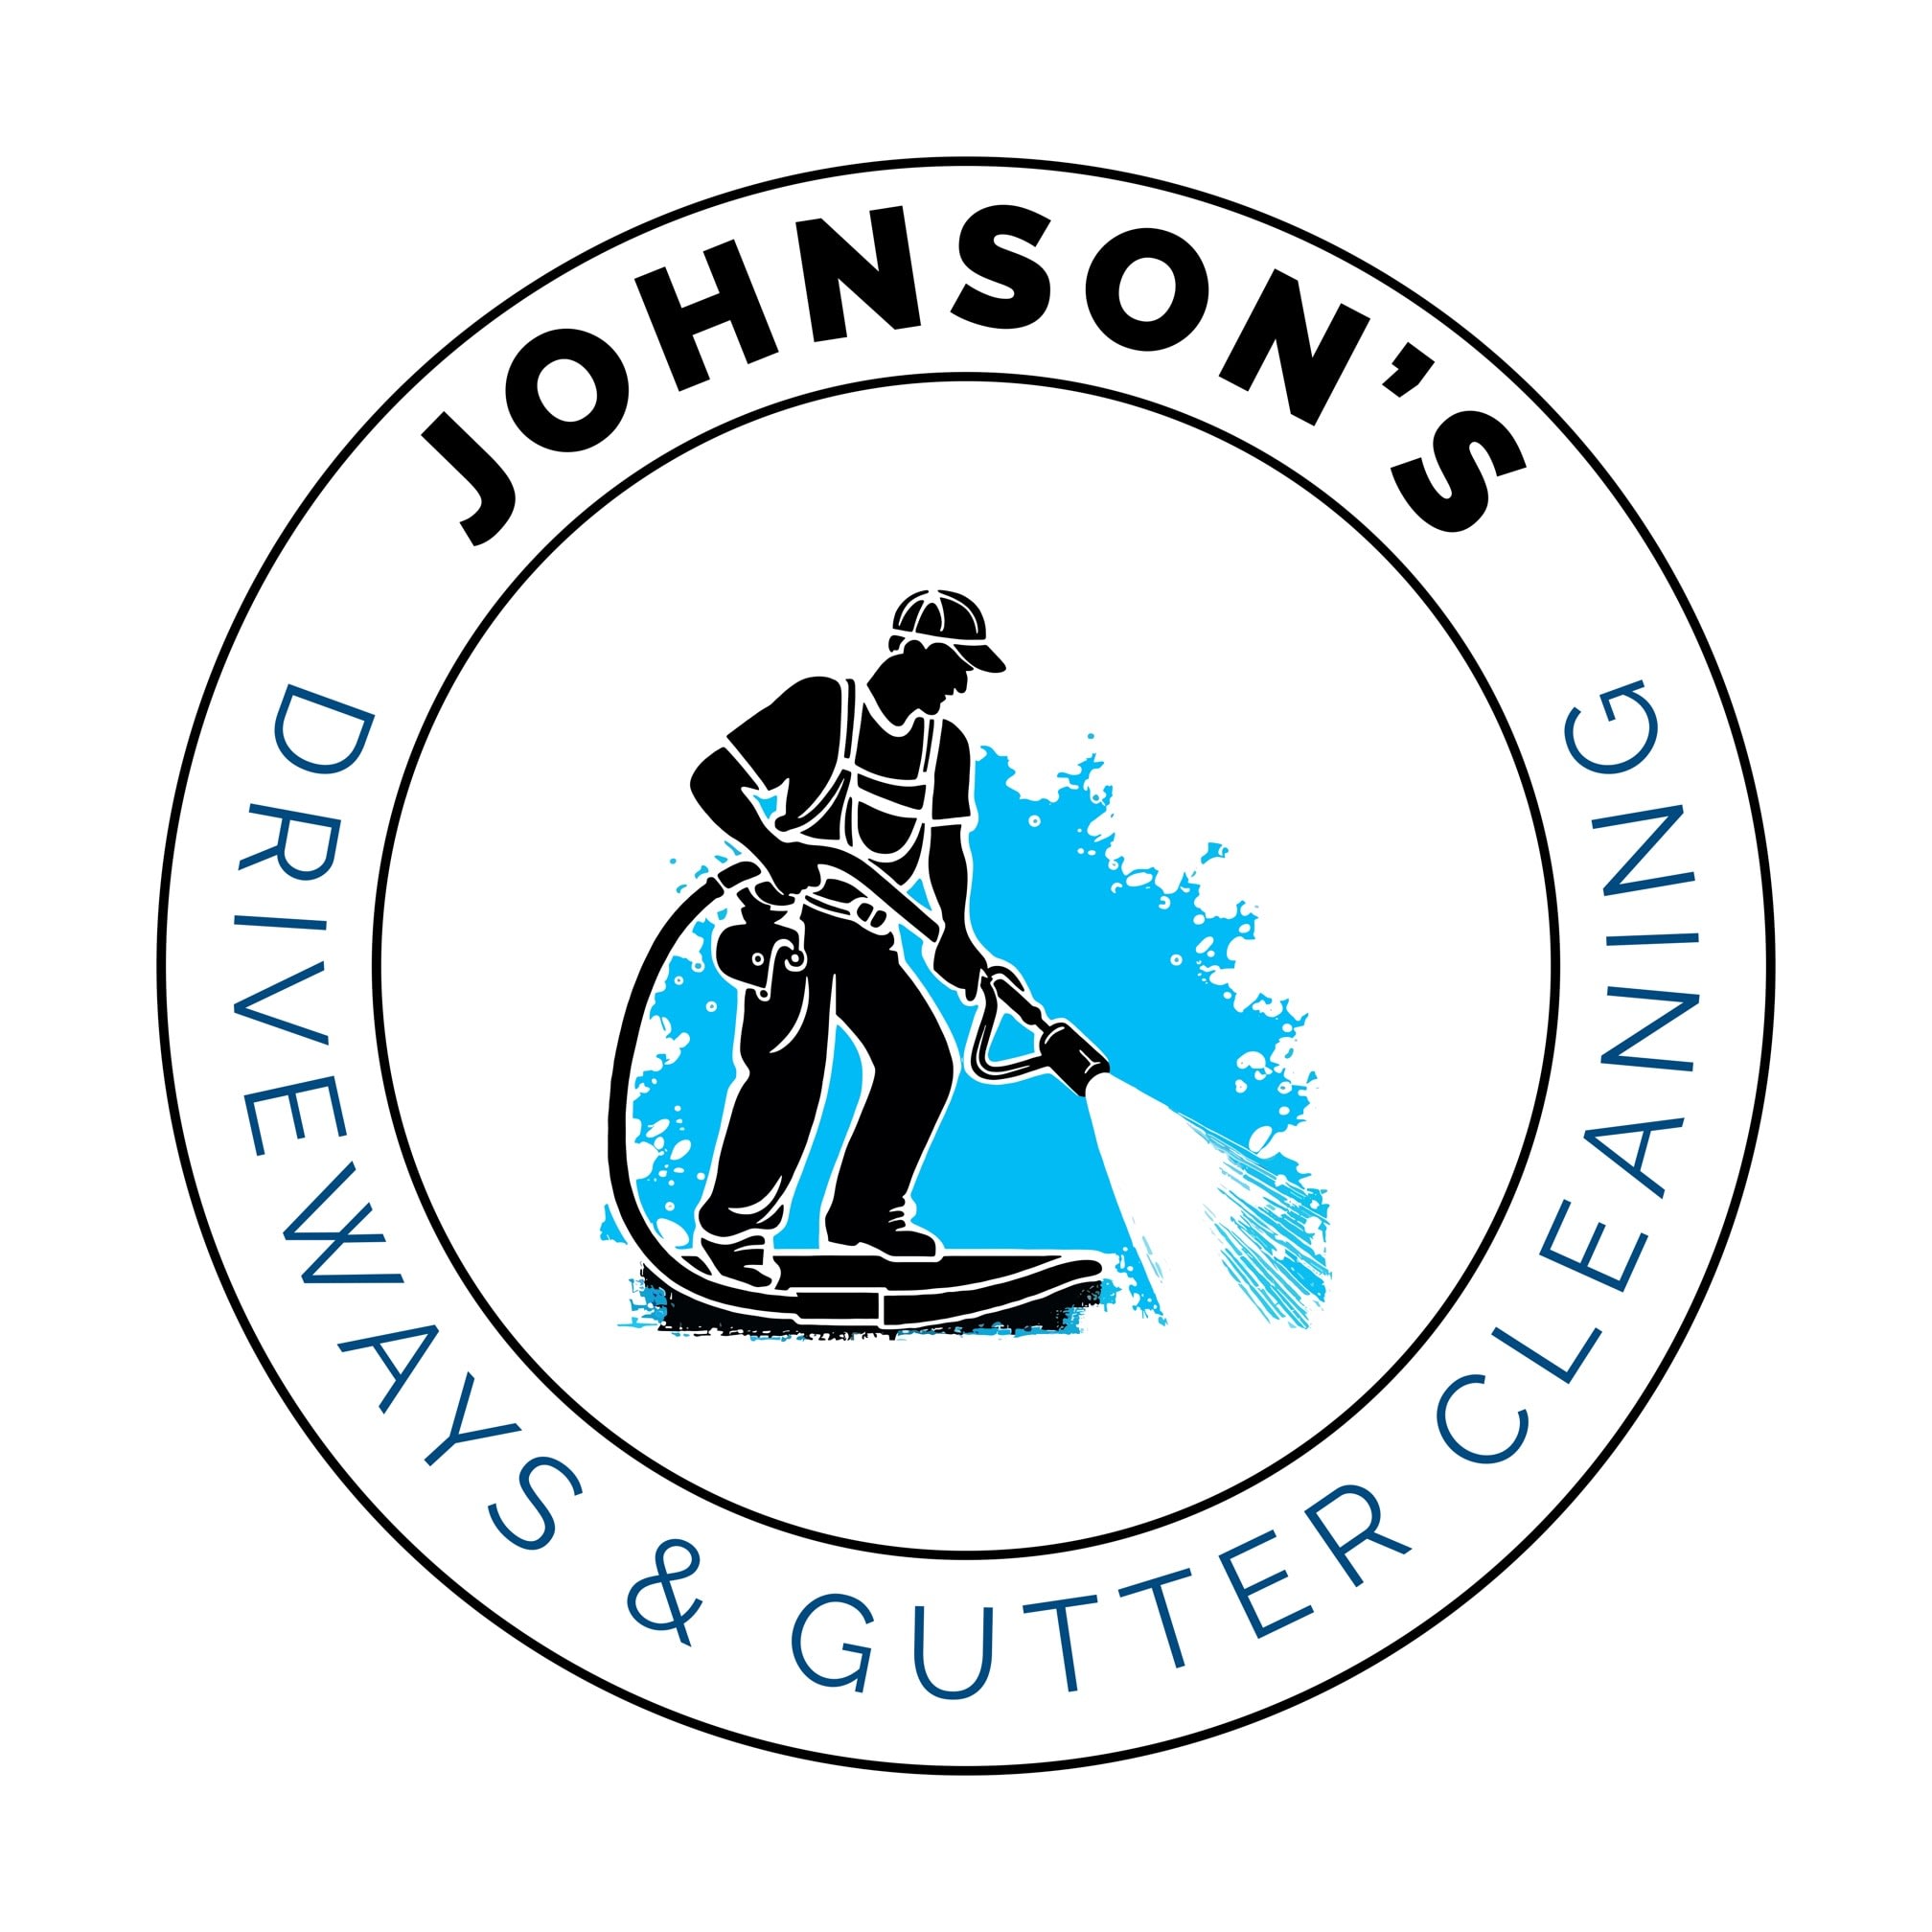 Images Johnson's Driveways and Gutter Cleaning